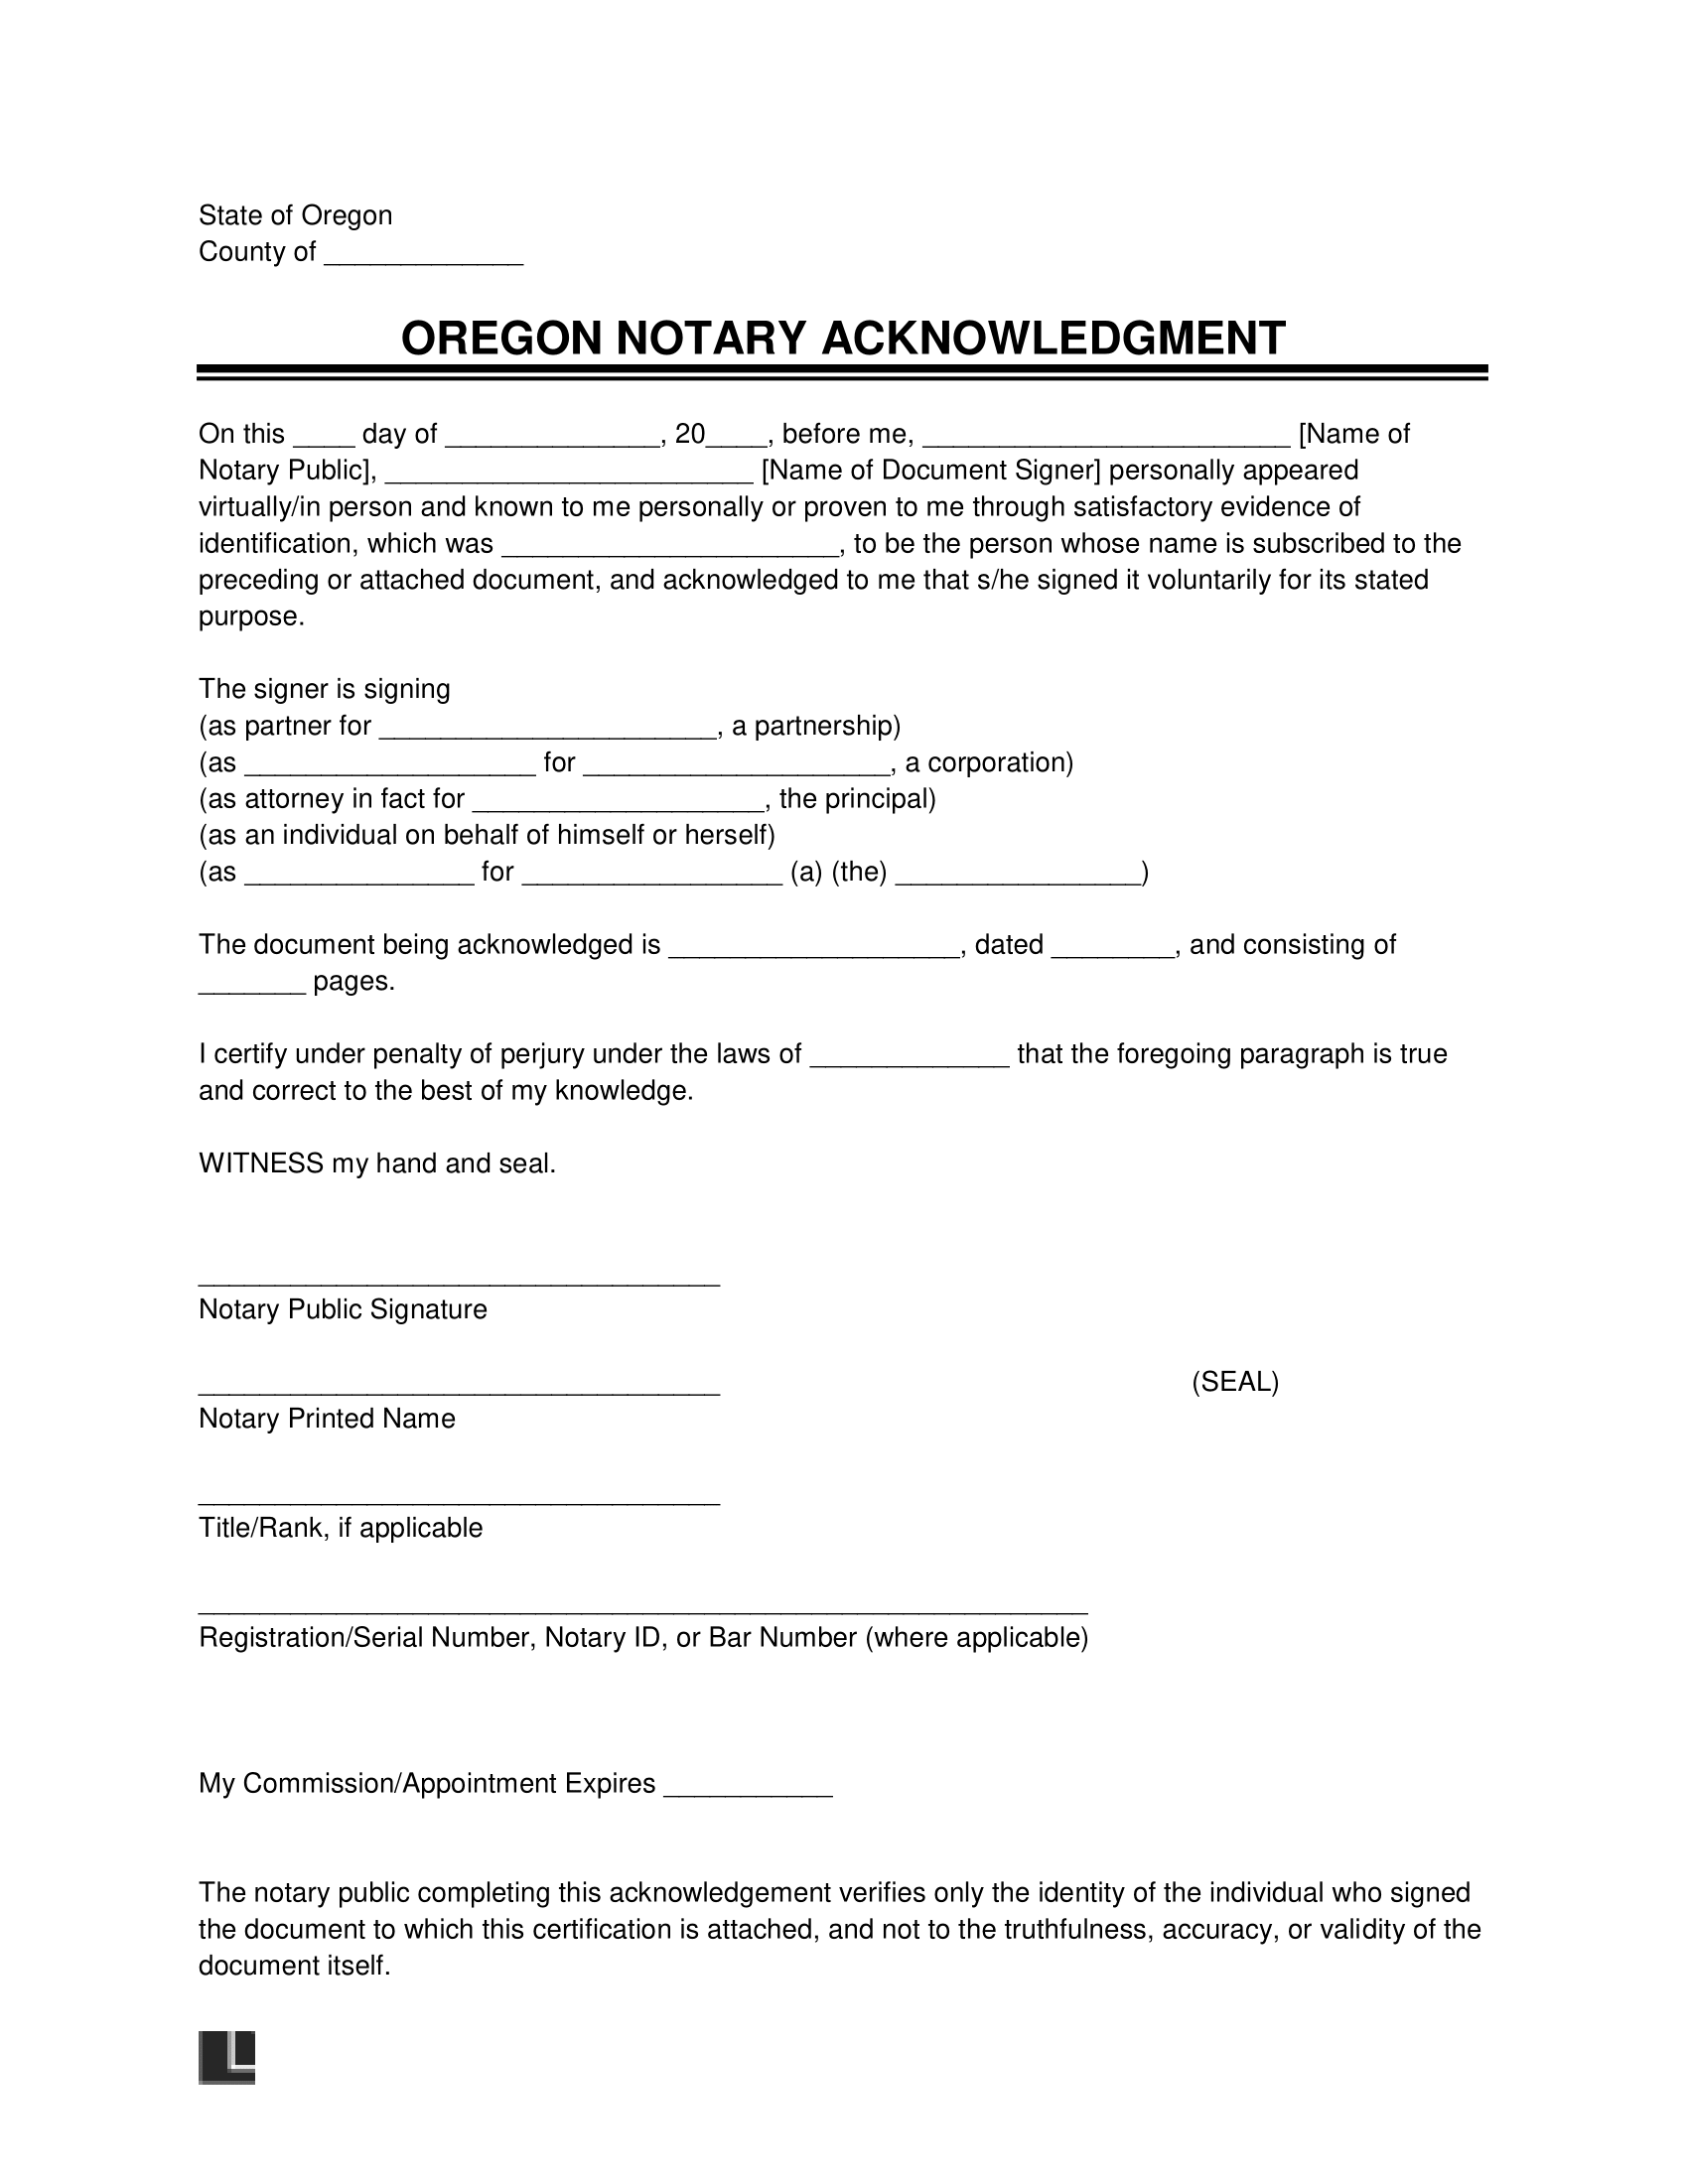 Oregon Notary Acknowledgment Form